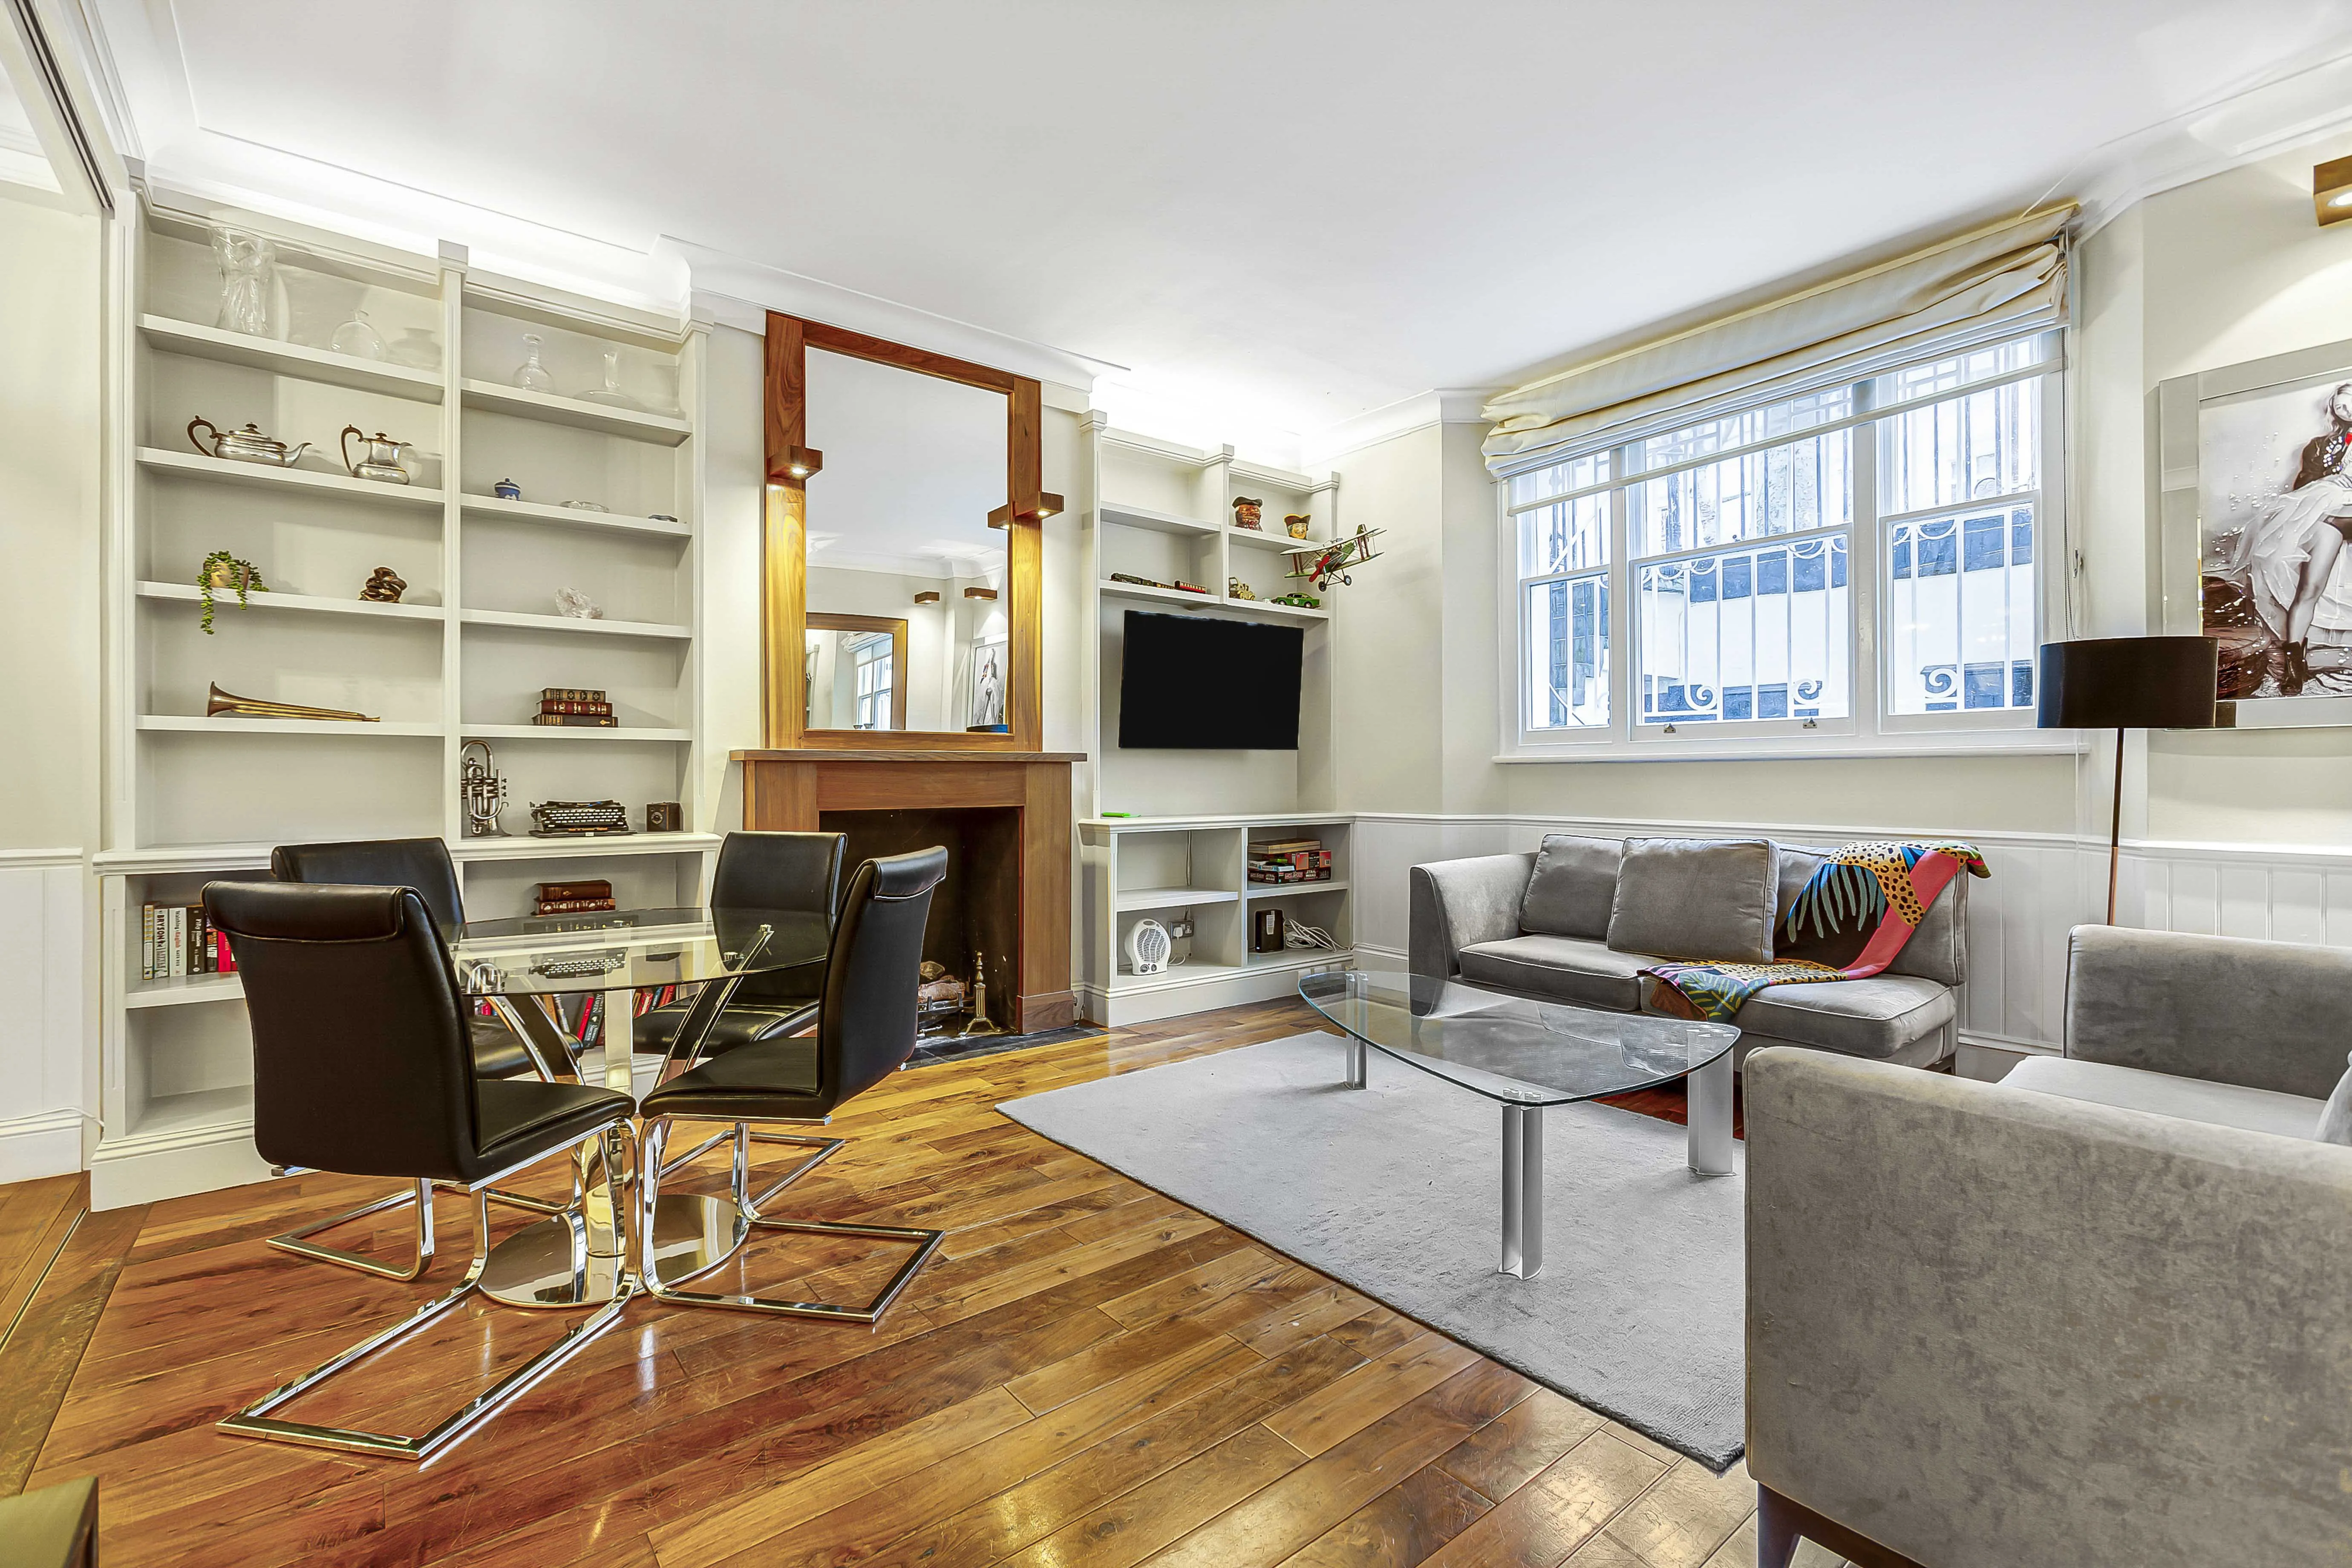 Queens Gate II, holiday apartment in Kensington, London